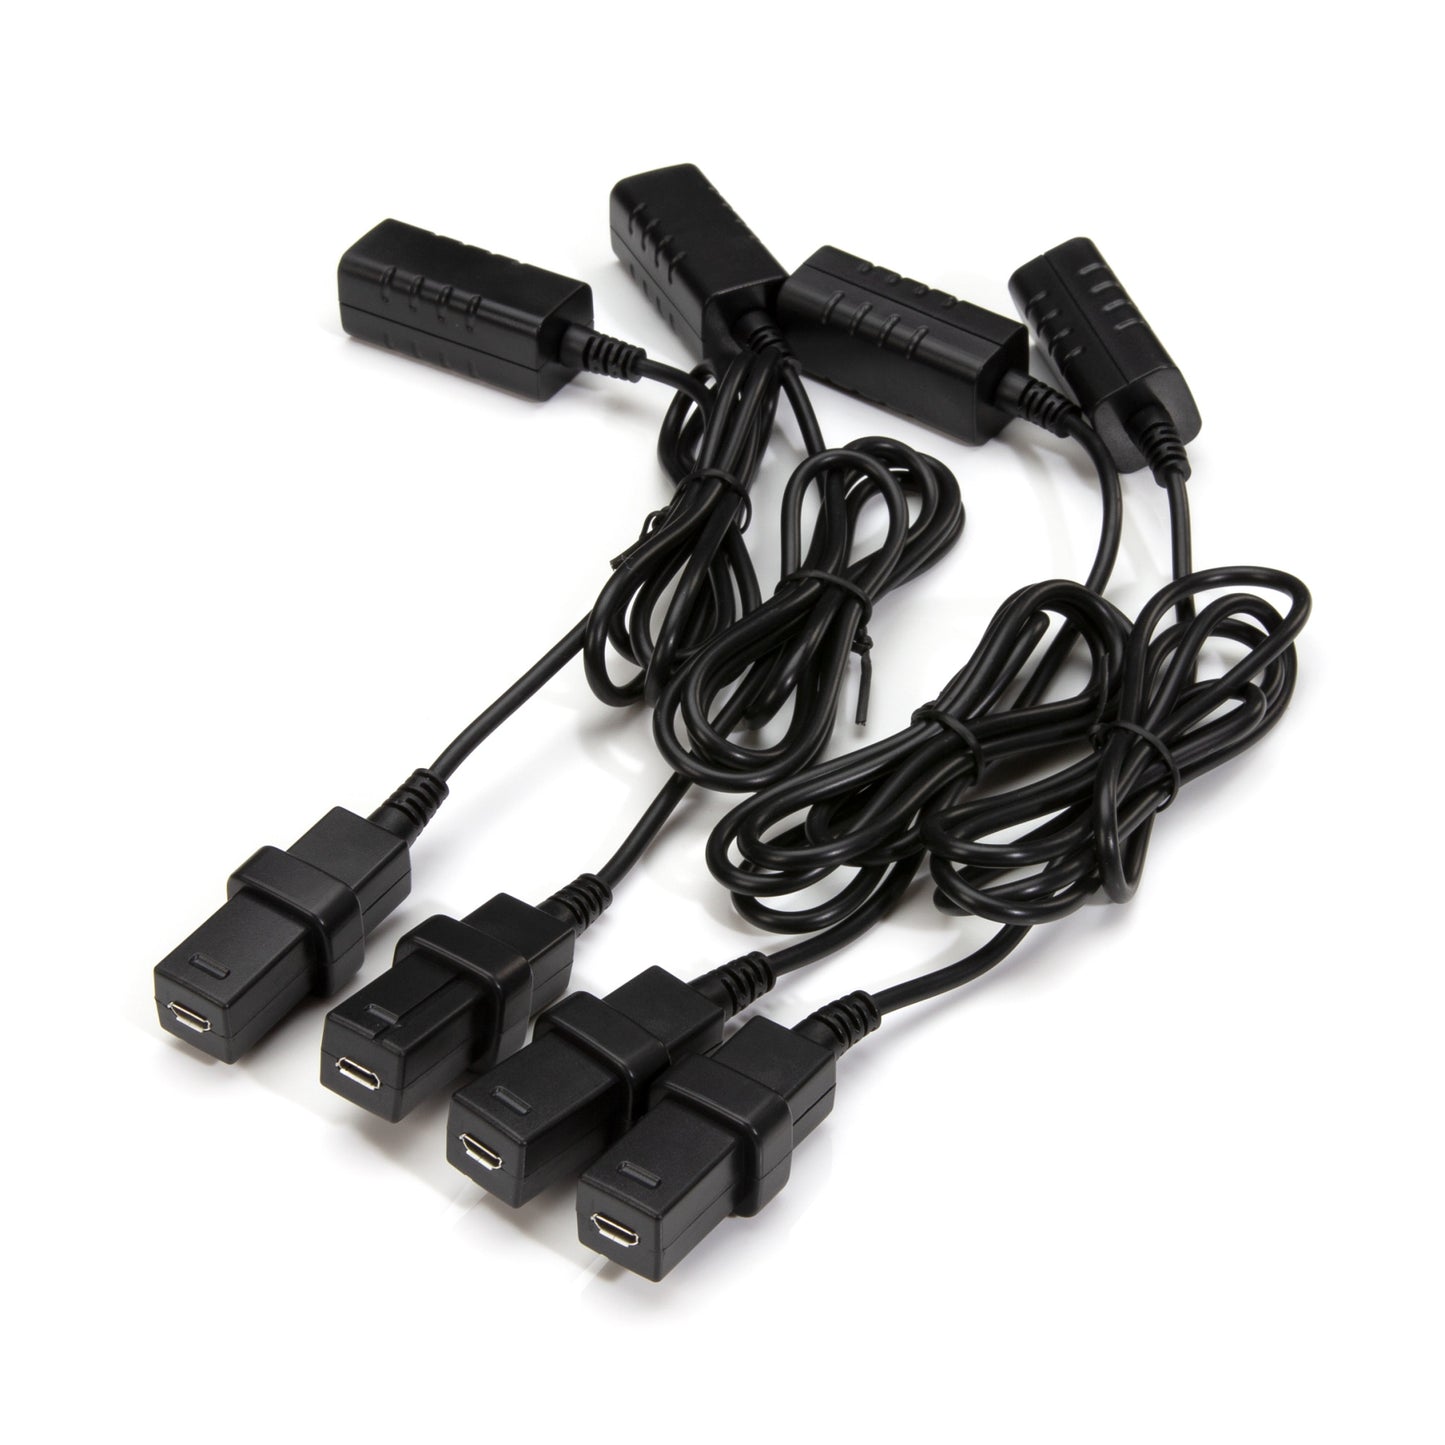 STEELMAN 1-Meter Jumper Cables for Wireless ChassisEAR 2, 4-pack